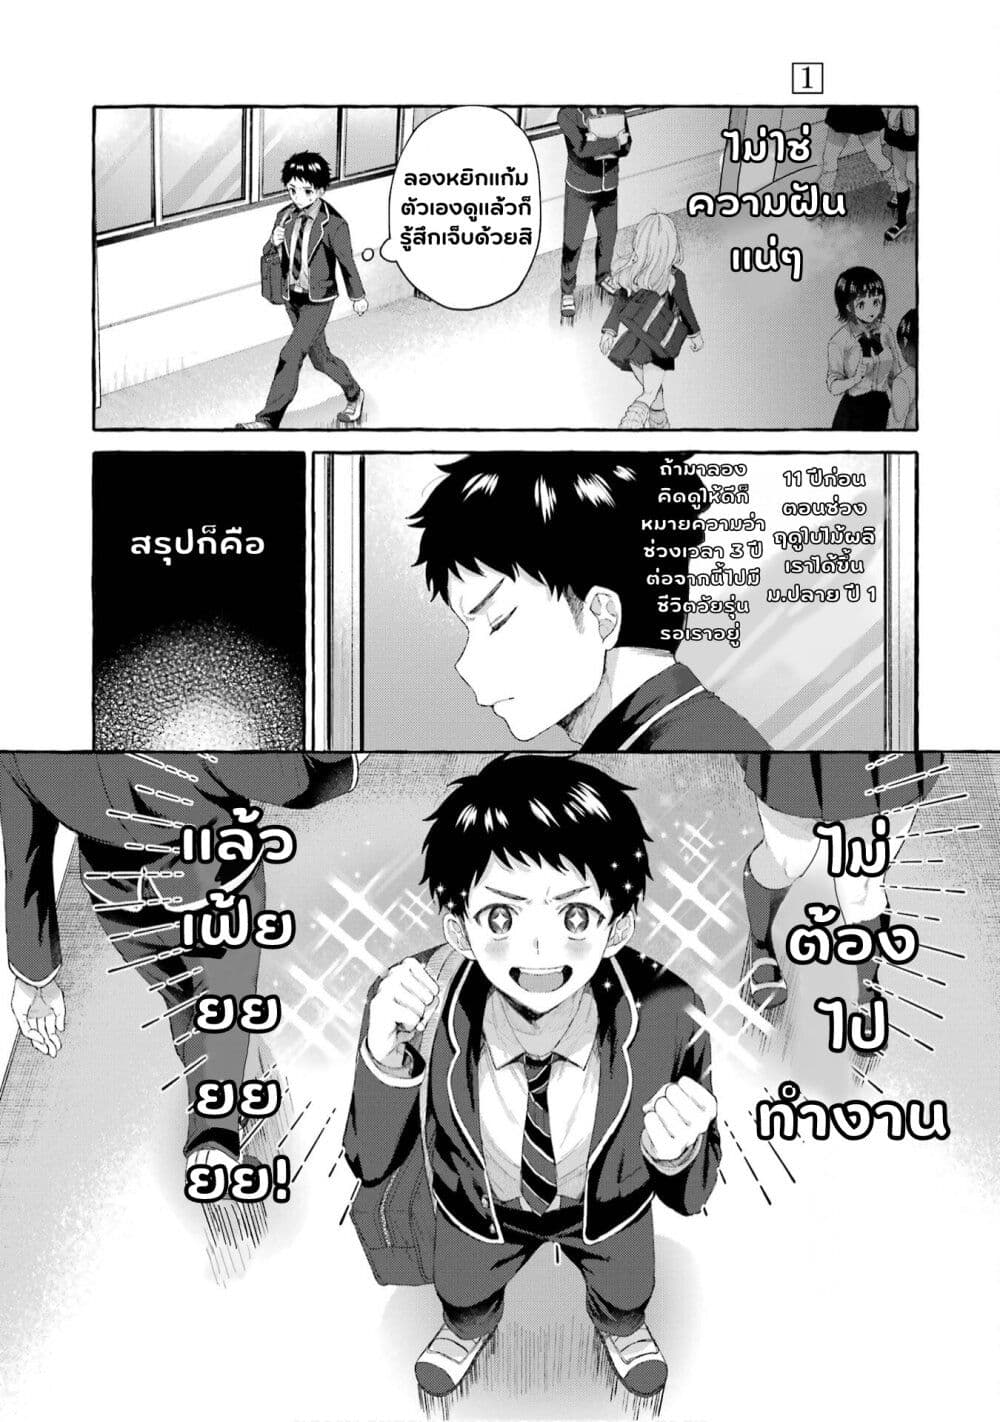 Why Is My Strict Boss Melted by Me ตอนที่ 1.2 (4)